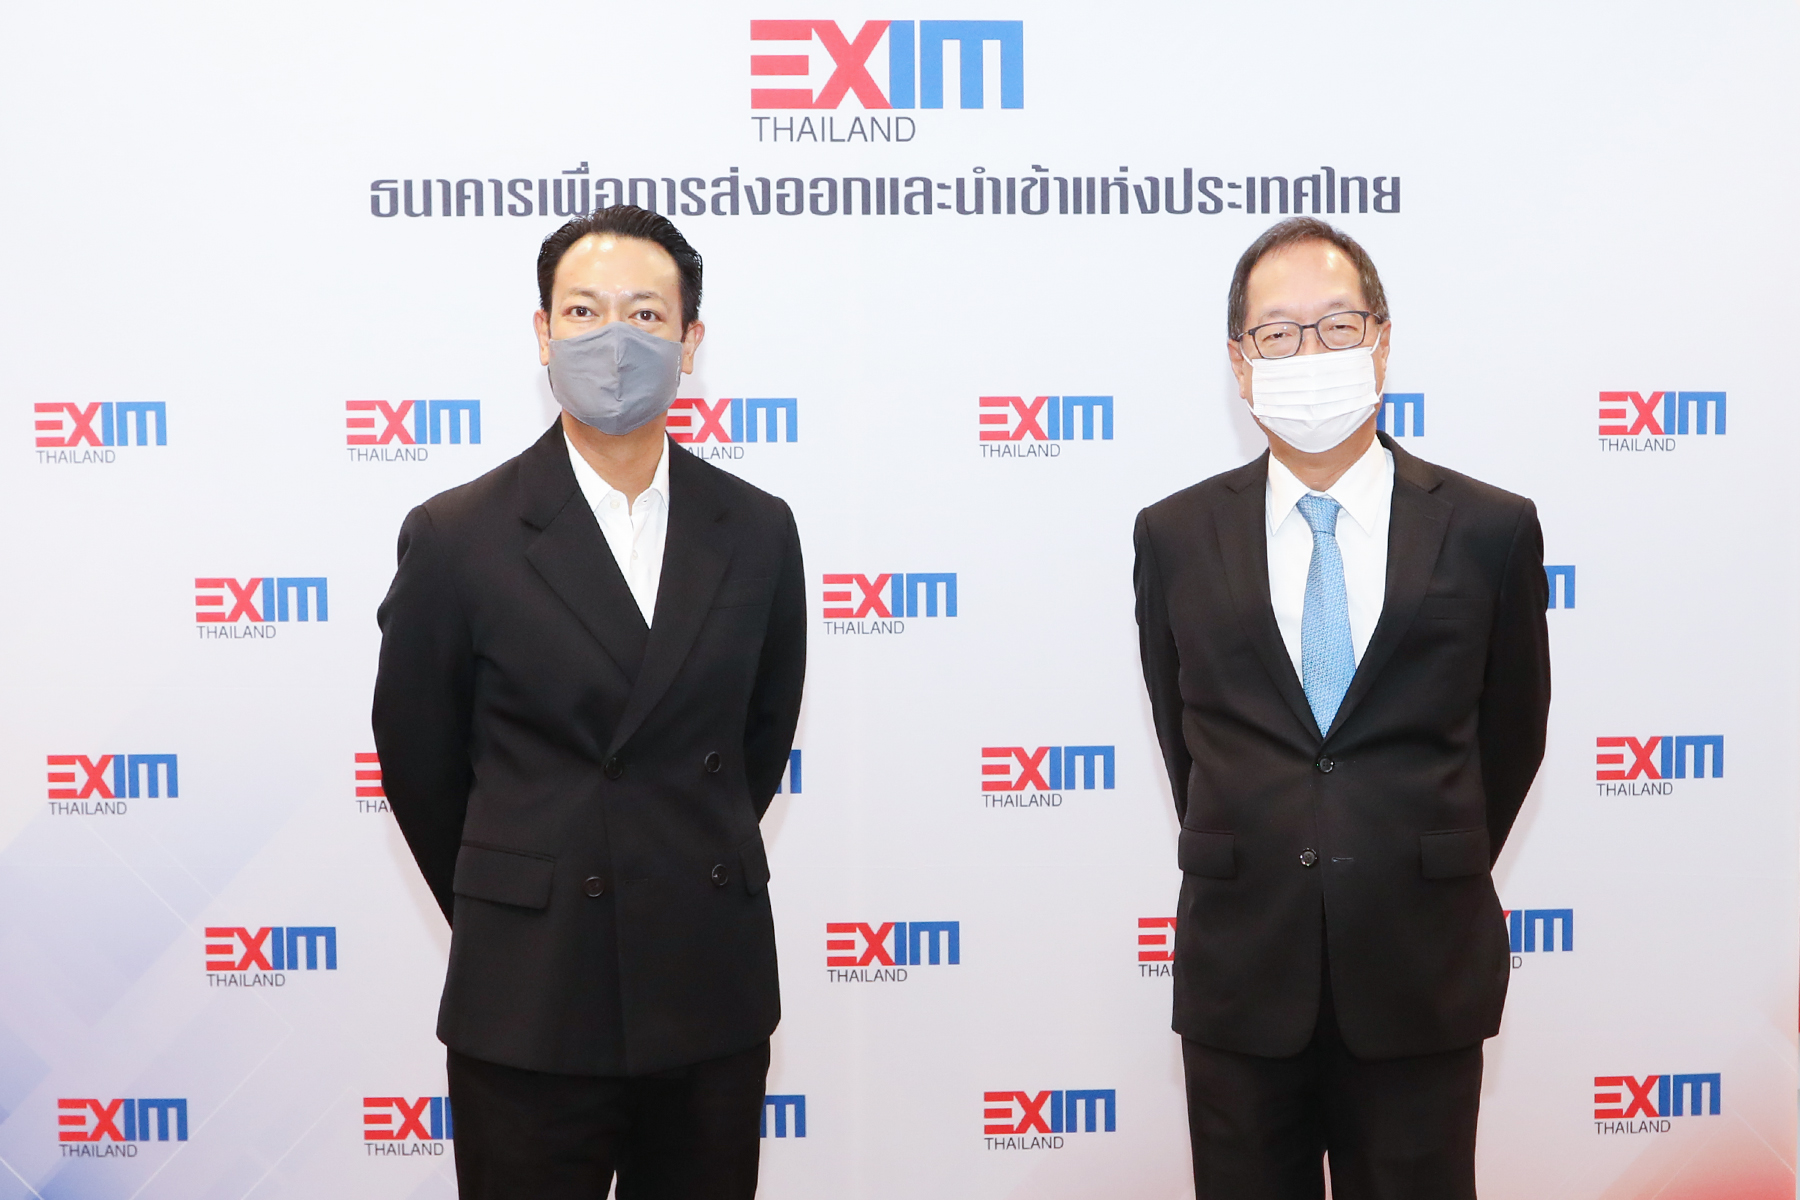 EXIM Thailand Organized the “EX1M Solution Forum” Pointing out Global Supply Chain Will Revive SMEs and Launches “EXIM Supply Chain Financing Solution”